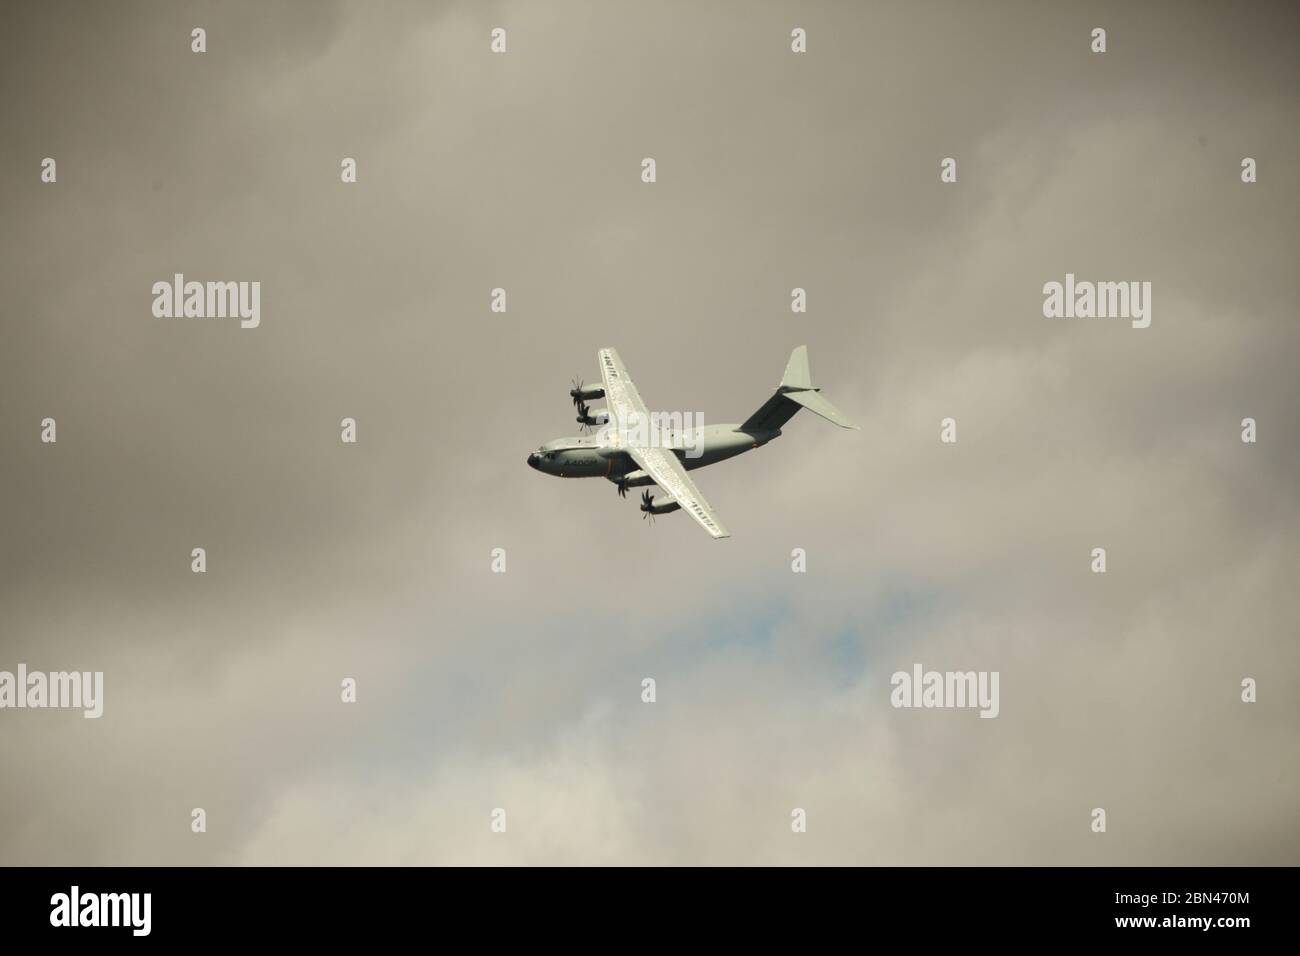 Airbus A400M, RAF Military Transport Aircraft Stockfoto